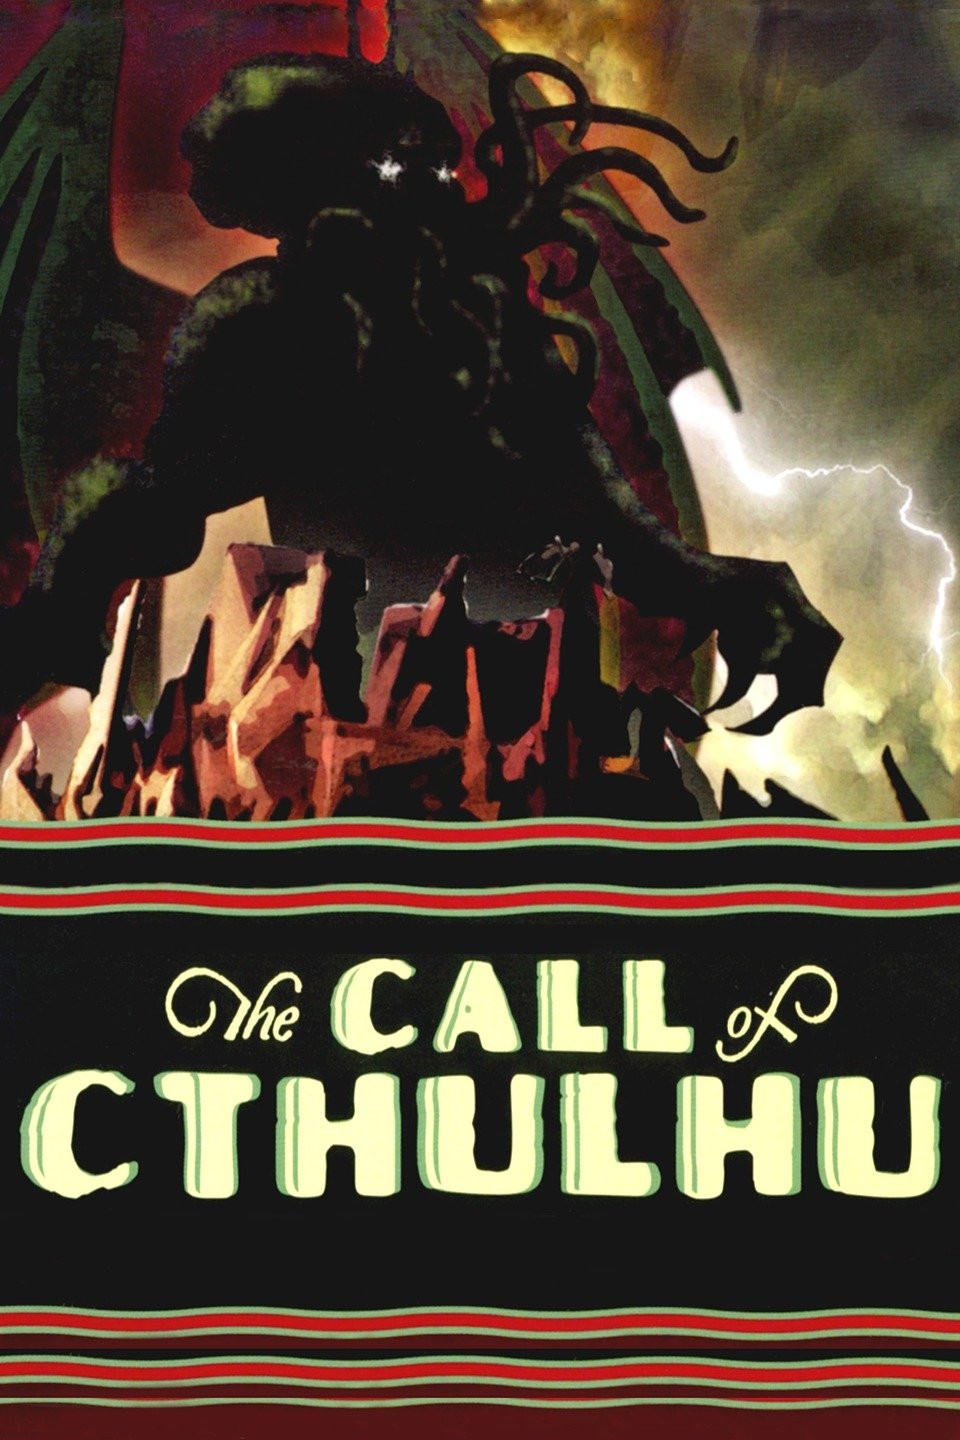 Fresh From The Mail: The 2005 Call of Cthulhu film on DVD. Highly